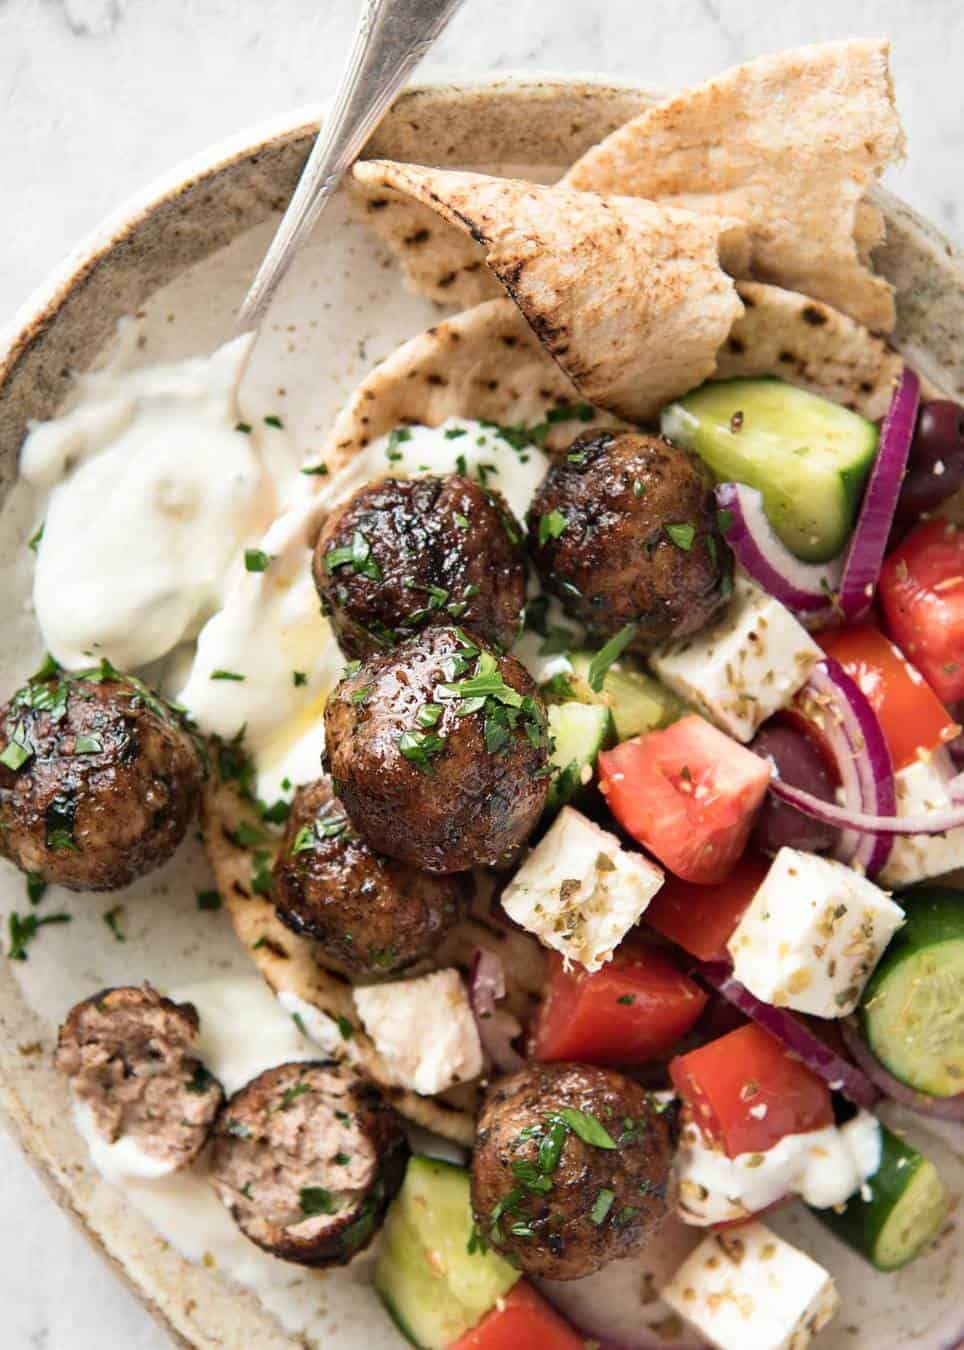 Soft, juicy, beautifully flavoured GREEK MEATBALLS! Serve as an appetiser with tzatziki, main with Greek Salad or make wraps! www.recipetineats.com